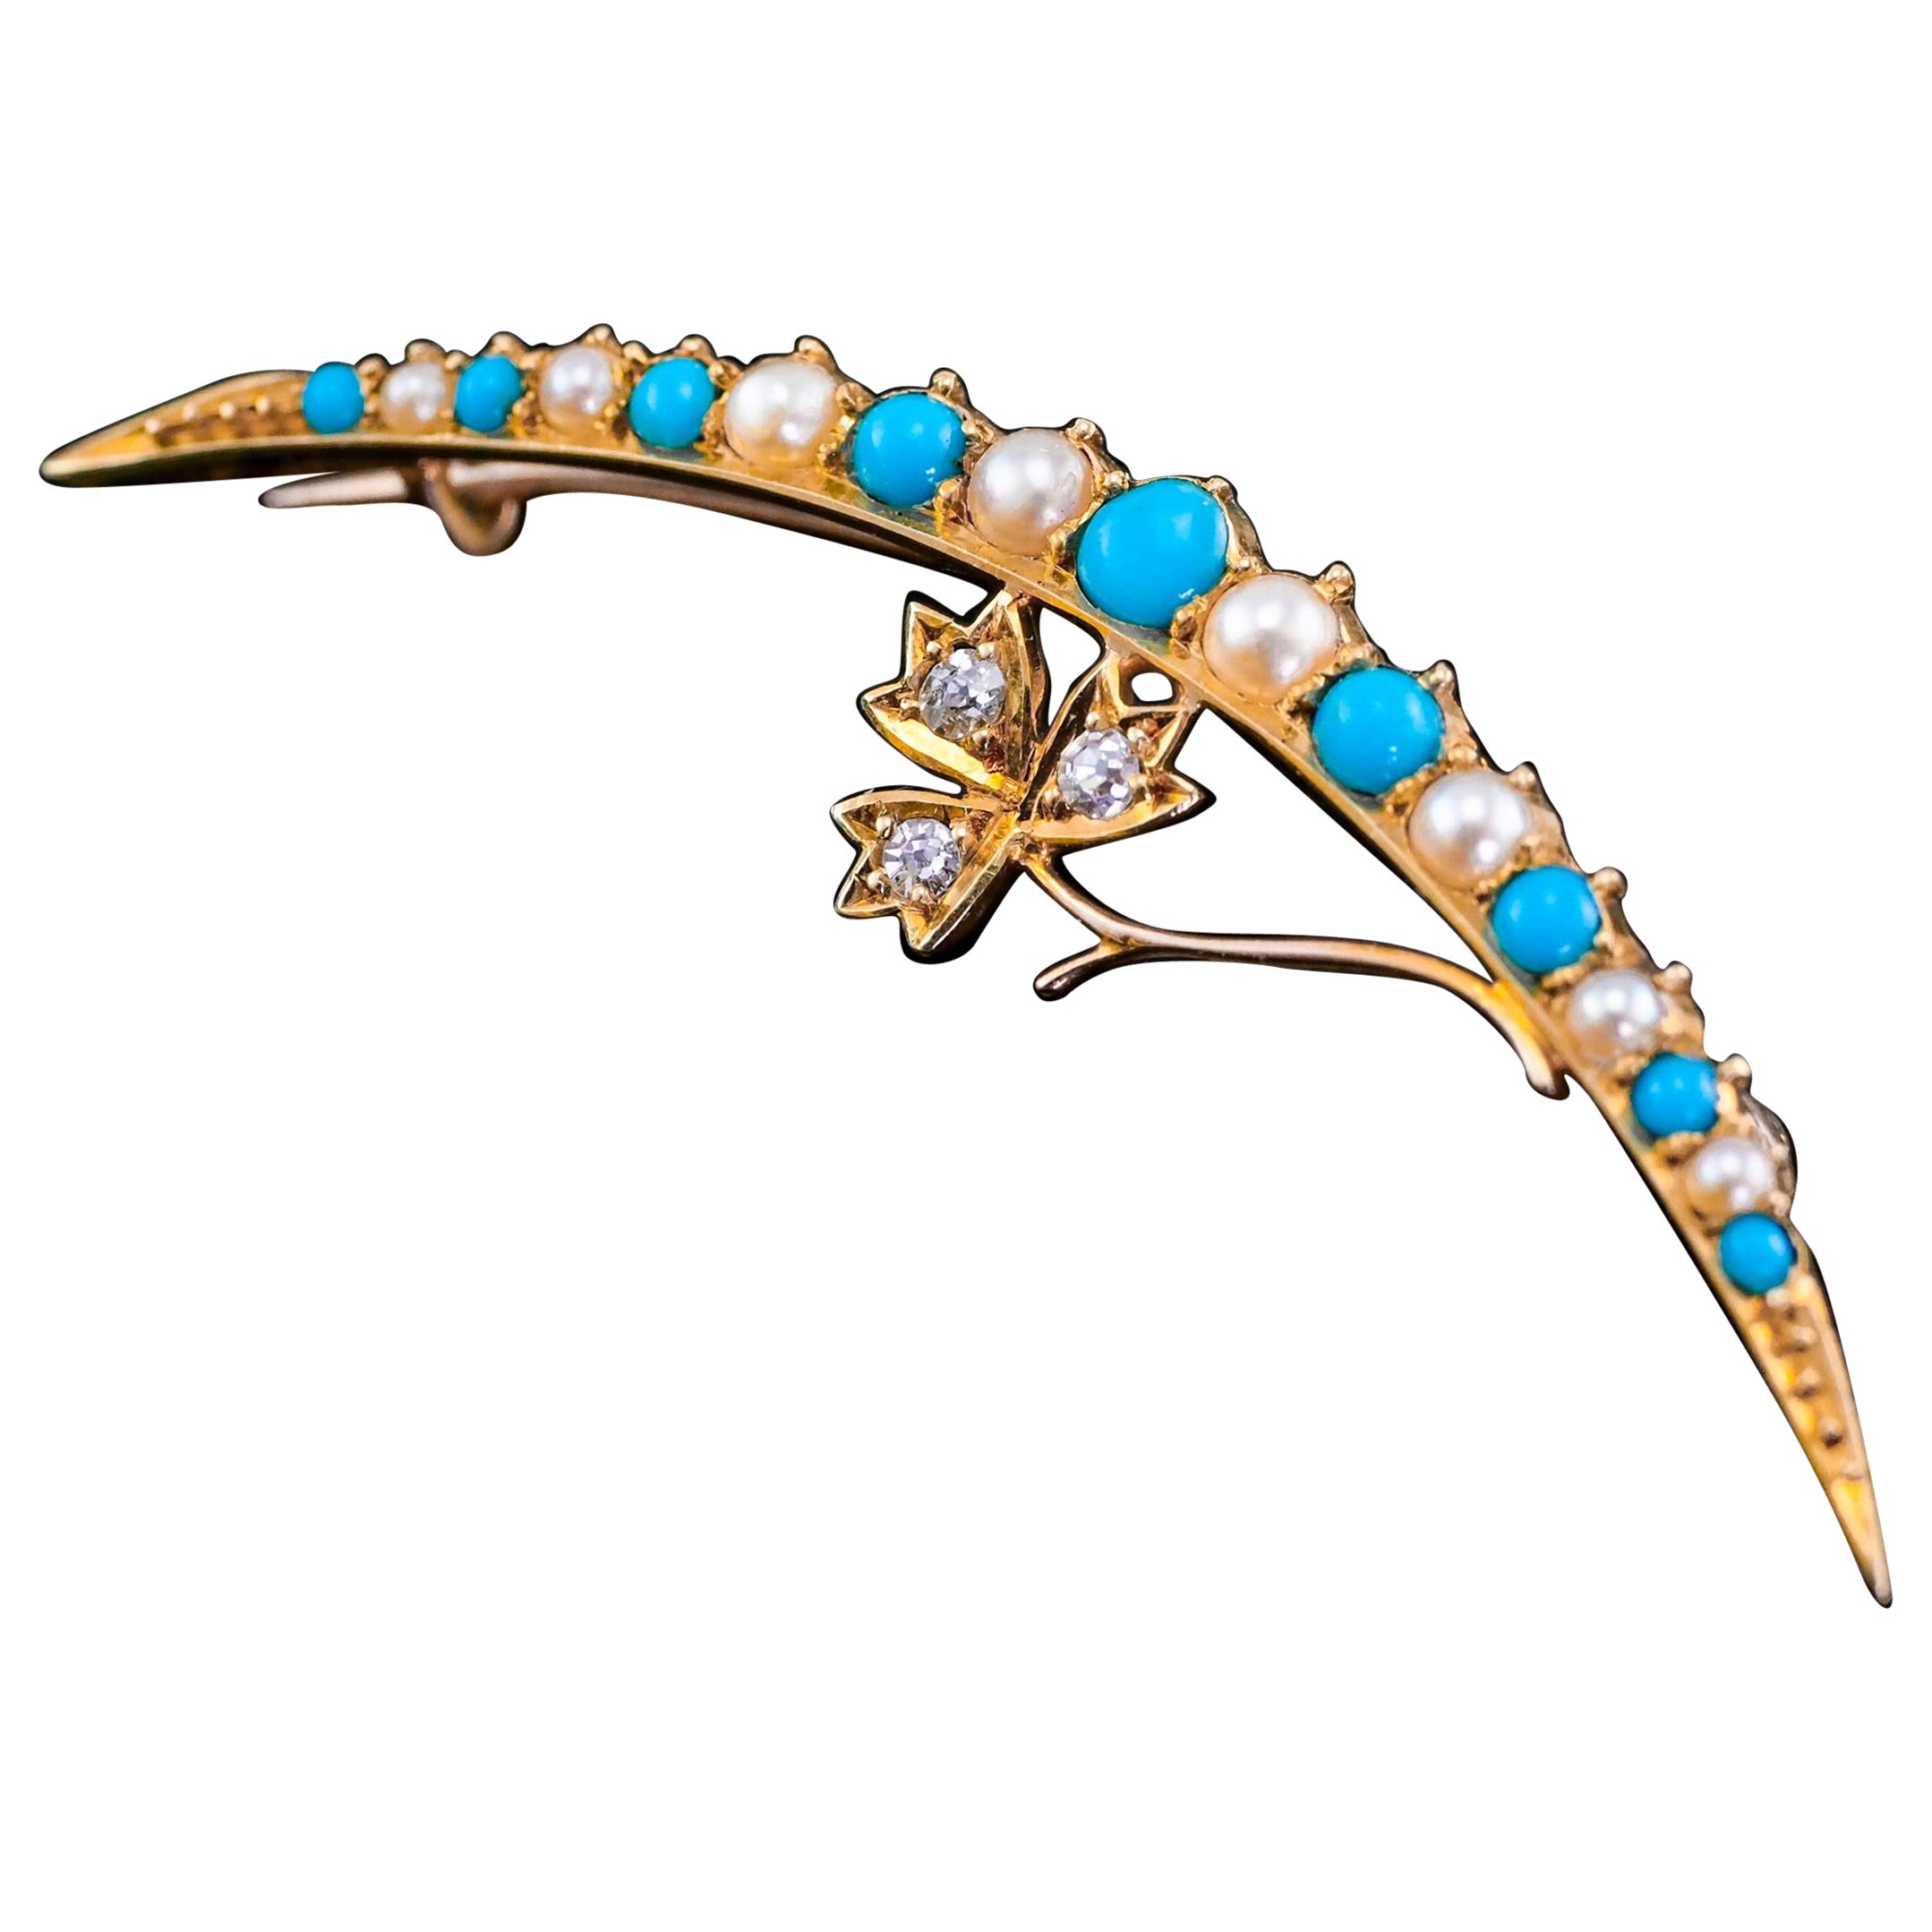 Antique Victorian 15k Gold Turquoise, Pearl & Diamond Crescent Brooch, c.1900